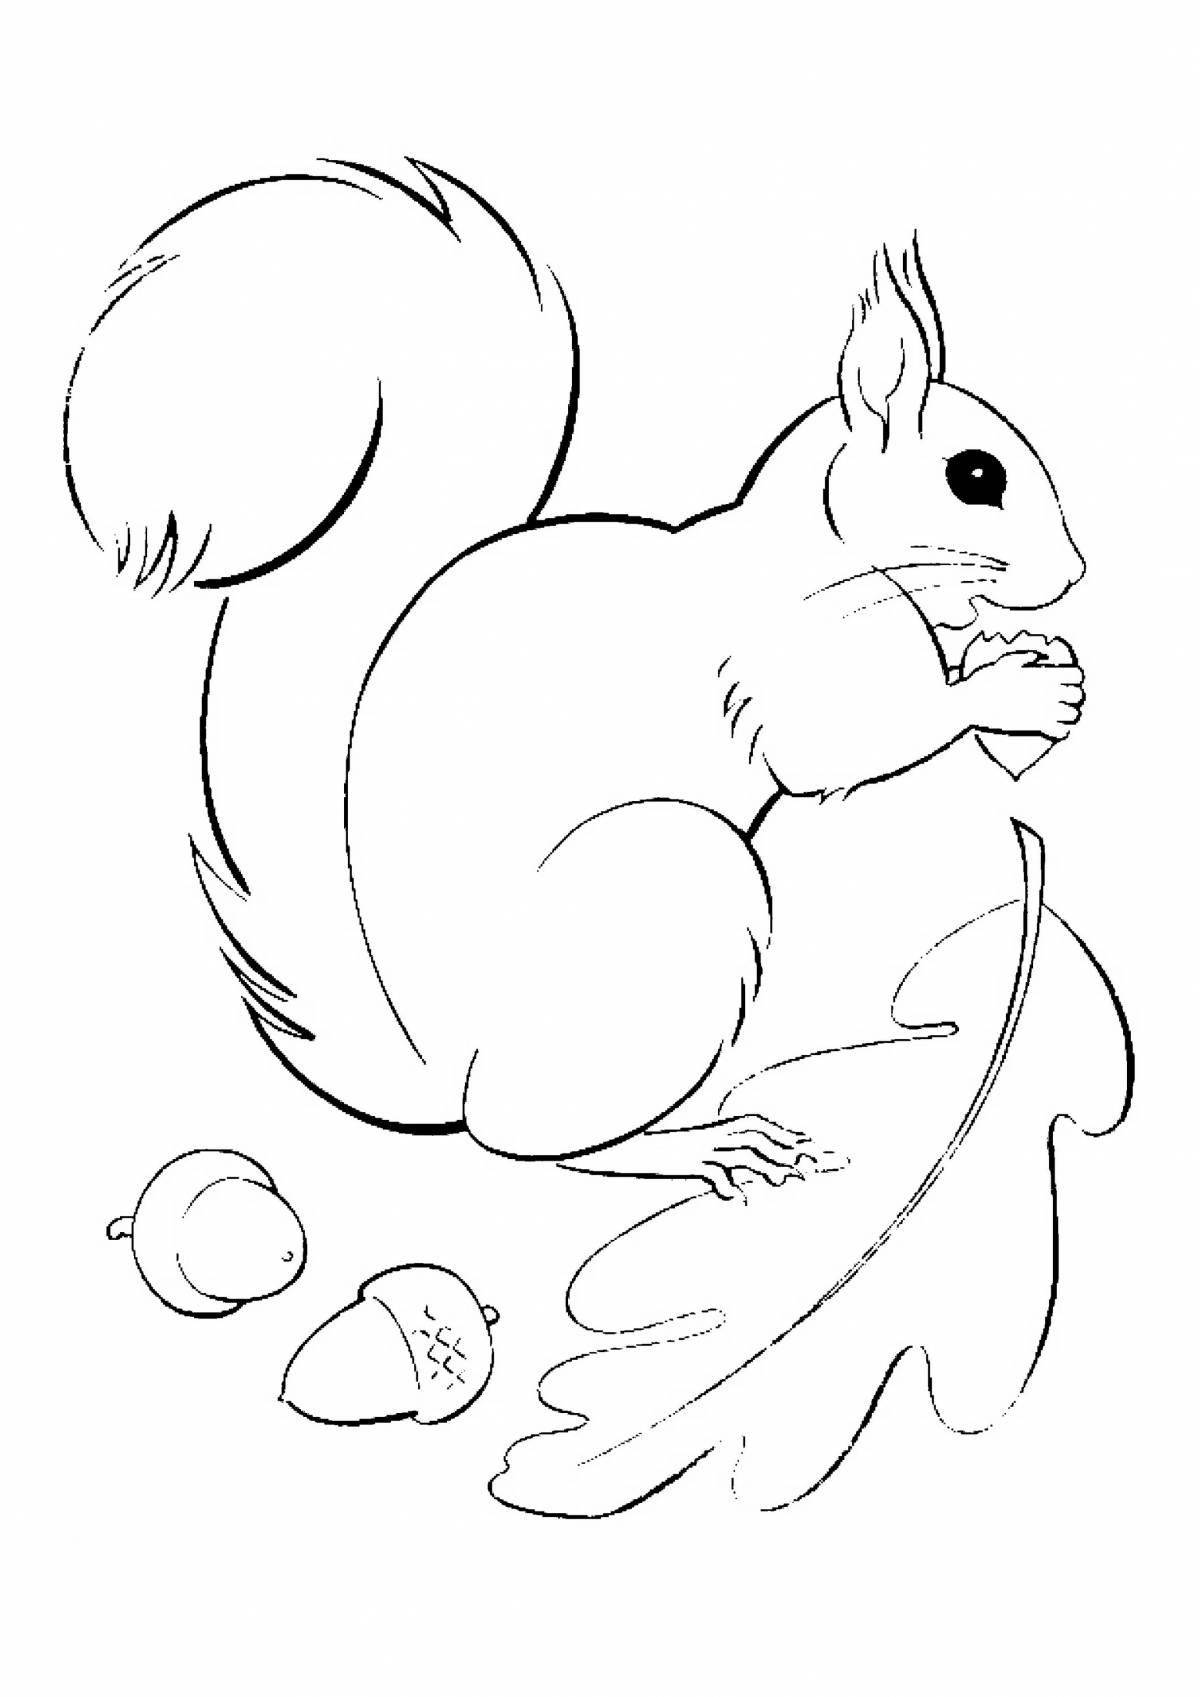 Calm drawing of a squirrel